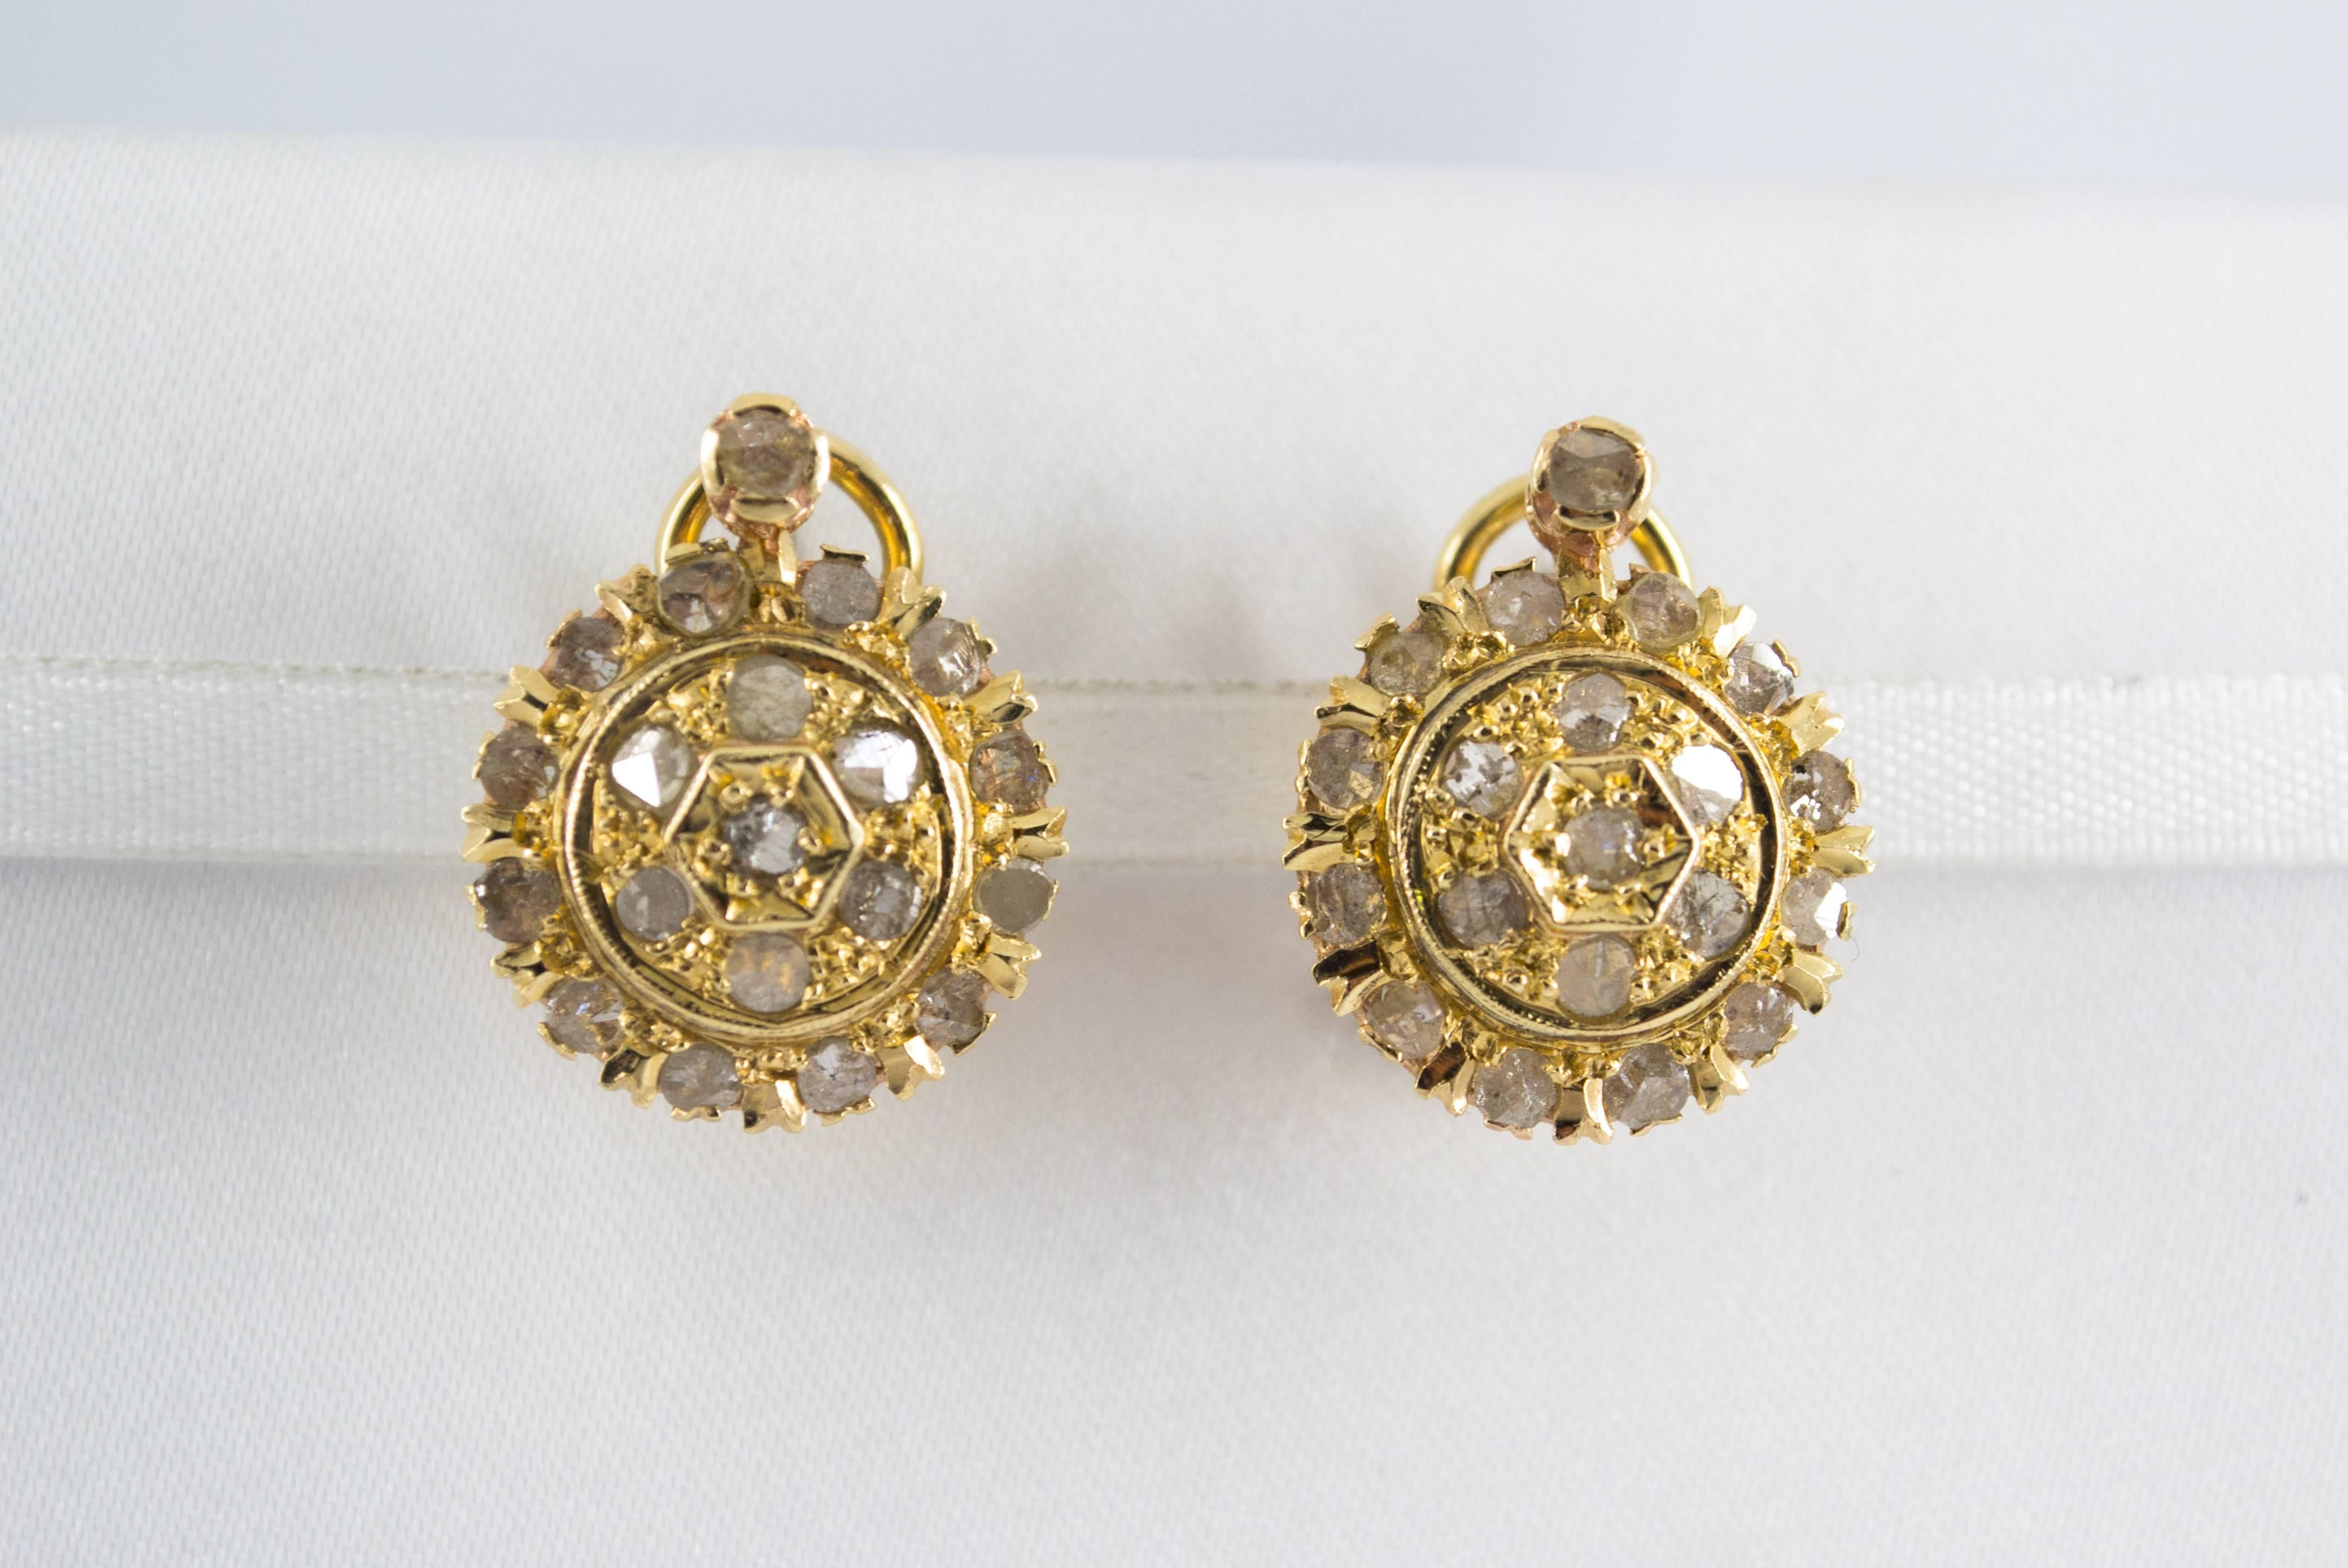 These Earrings are made of 9K Yellow Gold.
These Earrings have 1.20 Carats of White Diamonds.
All our Earrings have pins for pierced ears but we can change the closure and make any of our Earrings suitable even for non-pierced ears.
We're a workshop